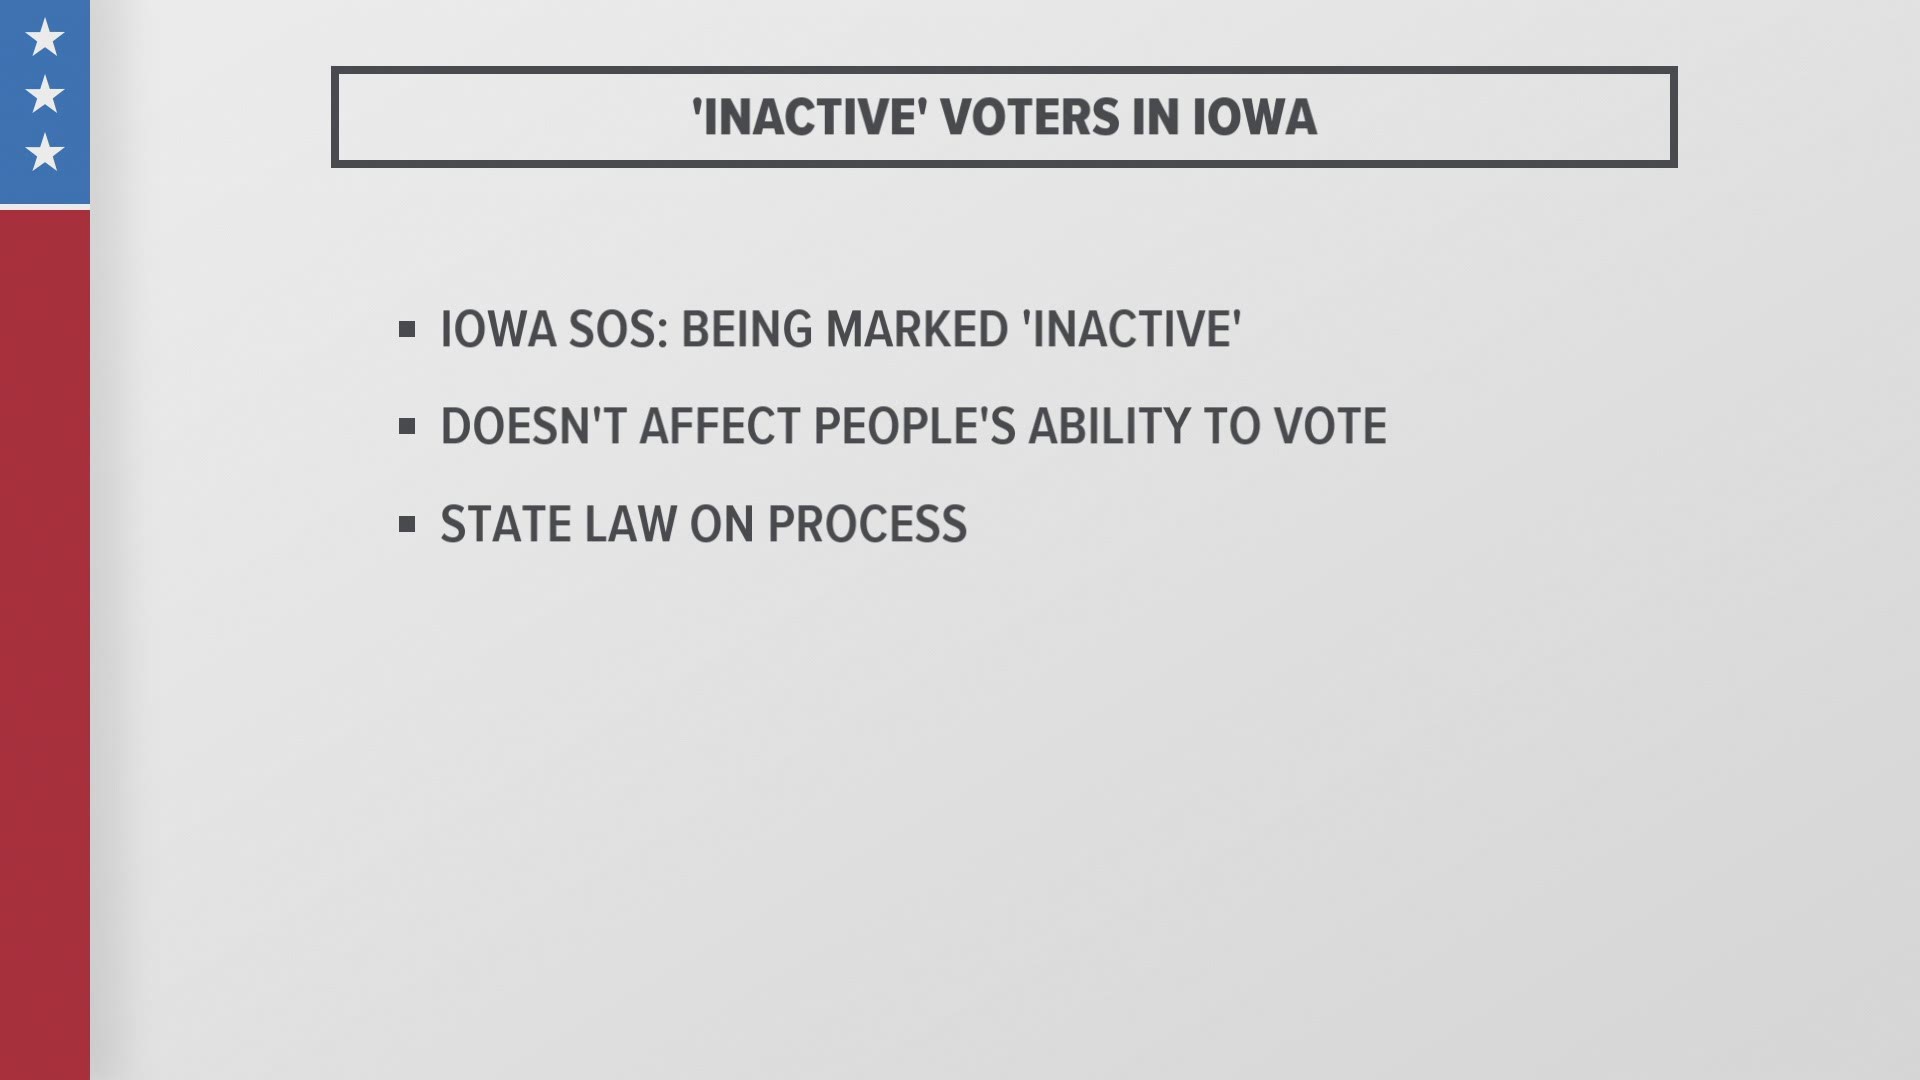 Being marked as inactive in the state's voter registration database does not immediately affect anyone’s ability to vote, according to the Iowa Secretary of State.